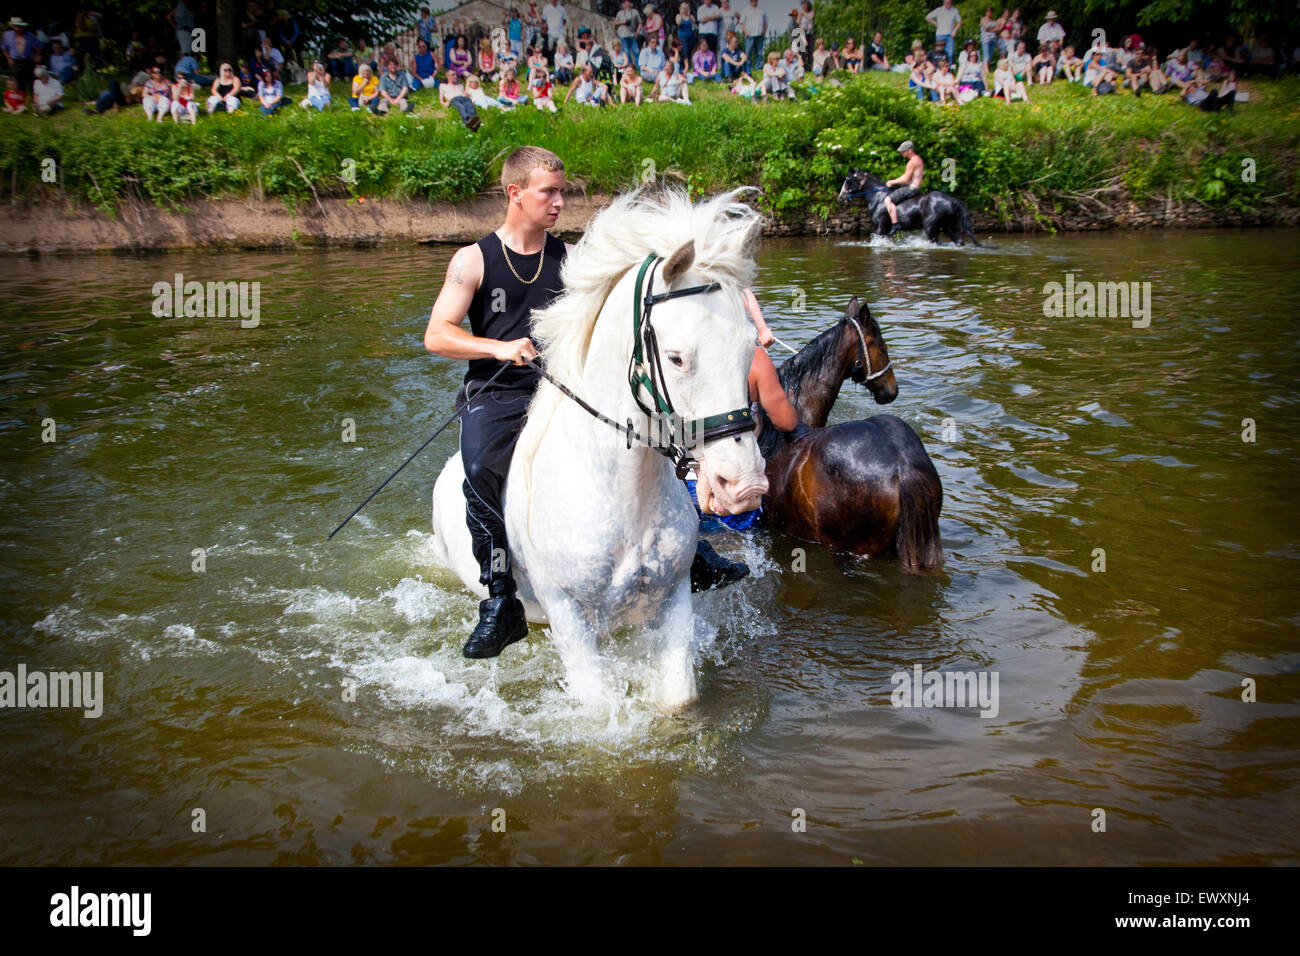 Washing a horse in the river during Appleby Horse Fair Stock Photo ...